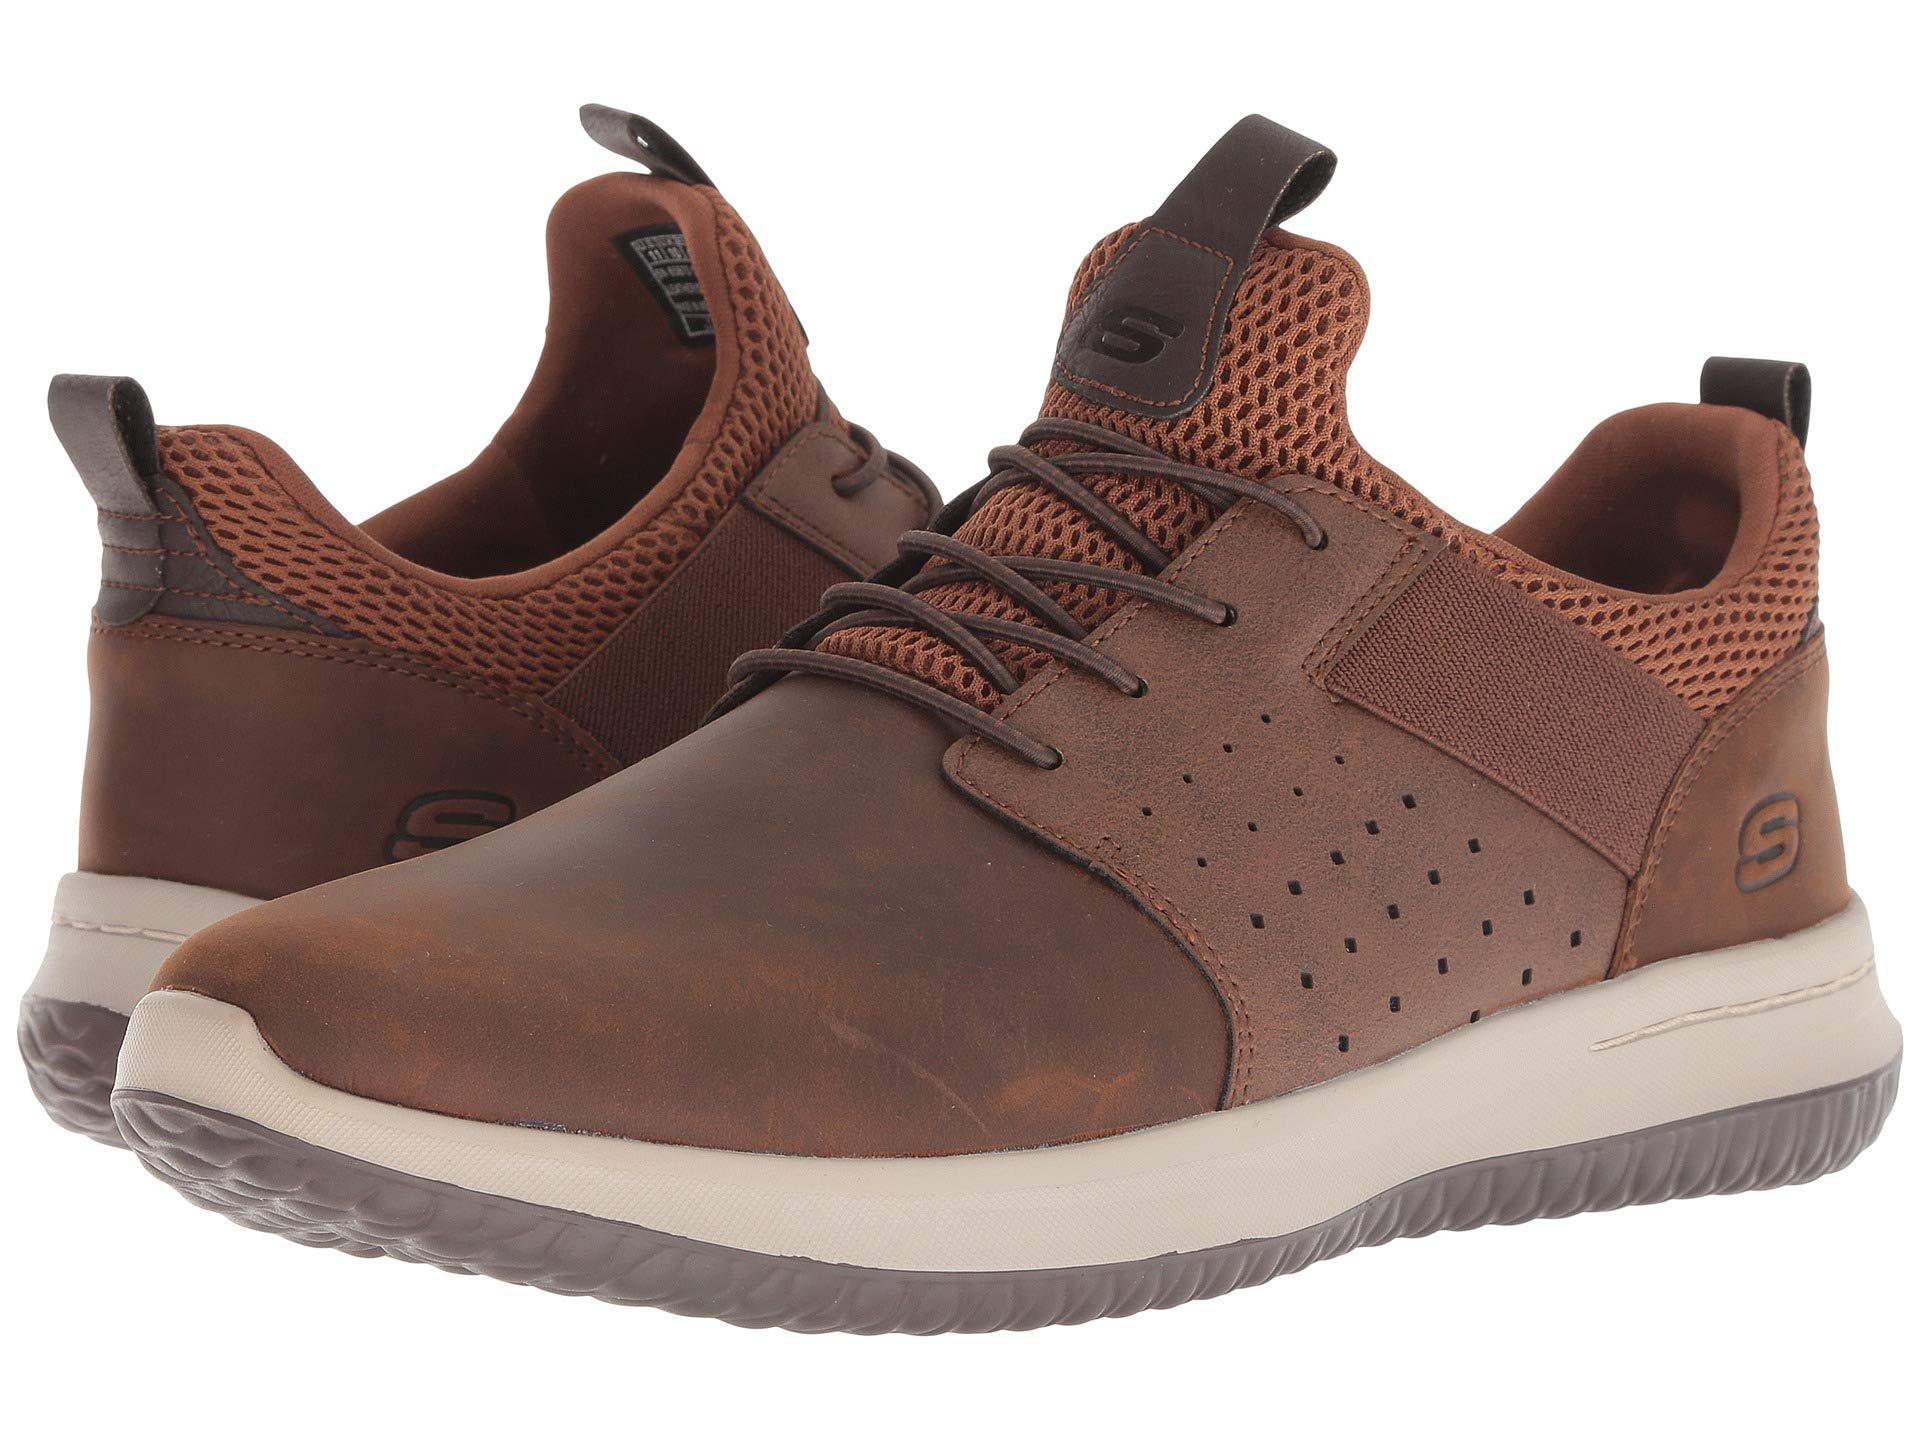 Lyst - Skechers Delson - Axton (dark Brown) Men's Lace Up Casual Shoes ...